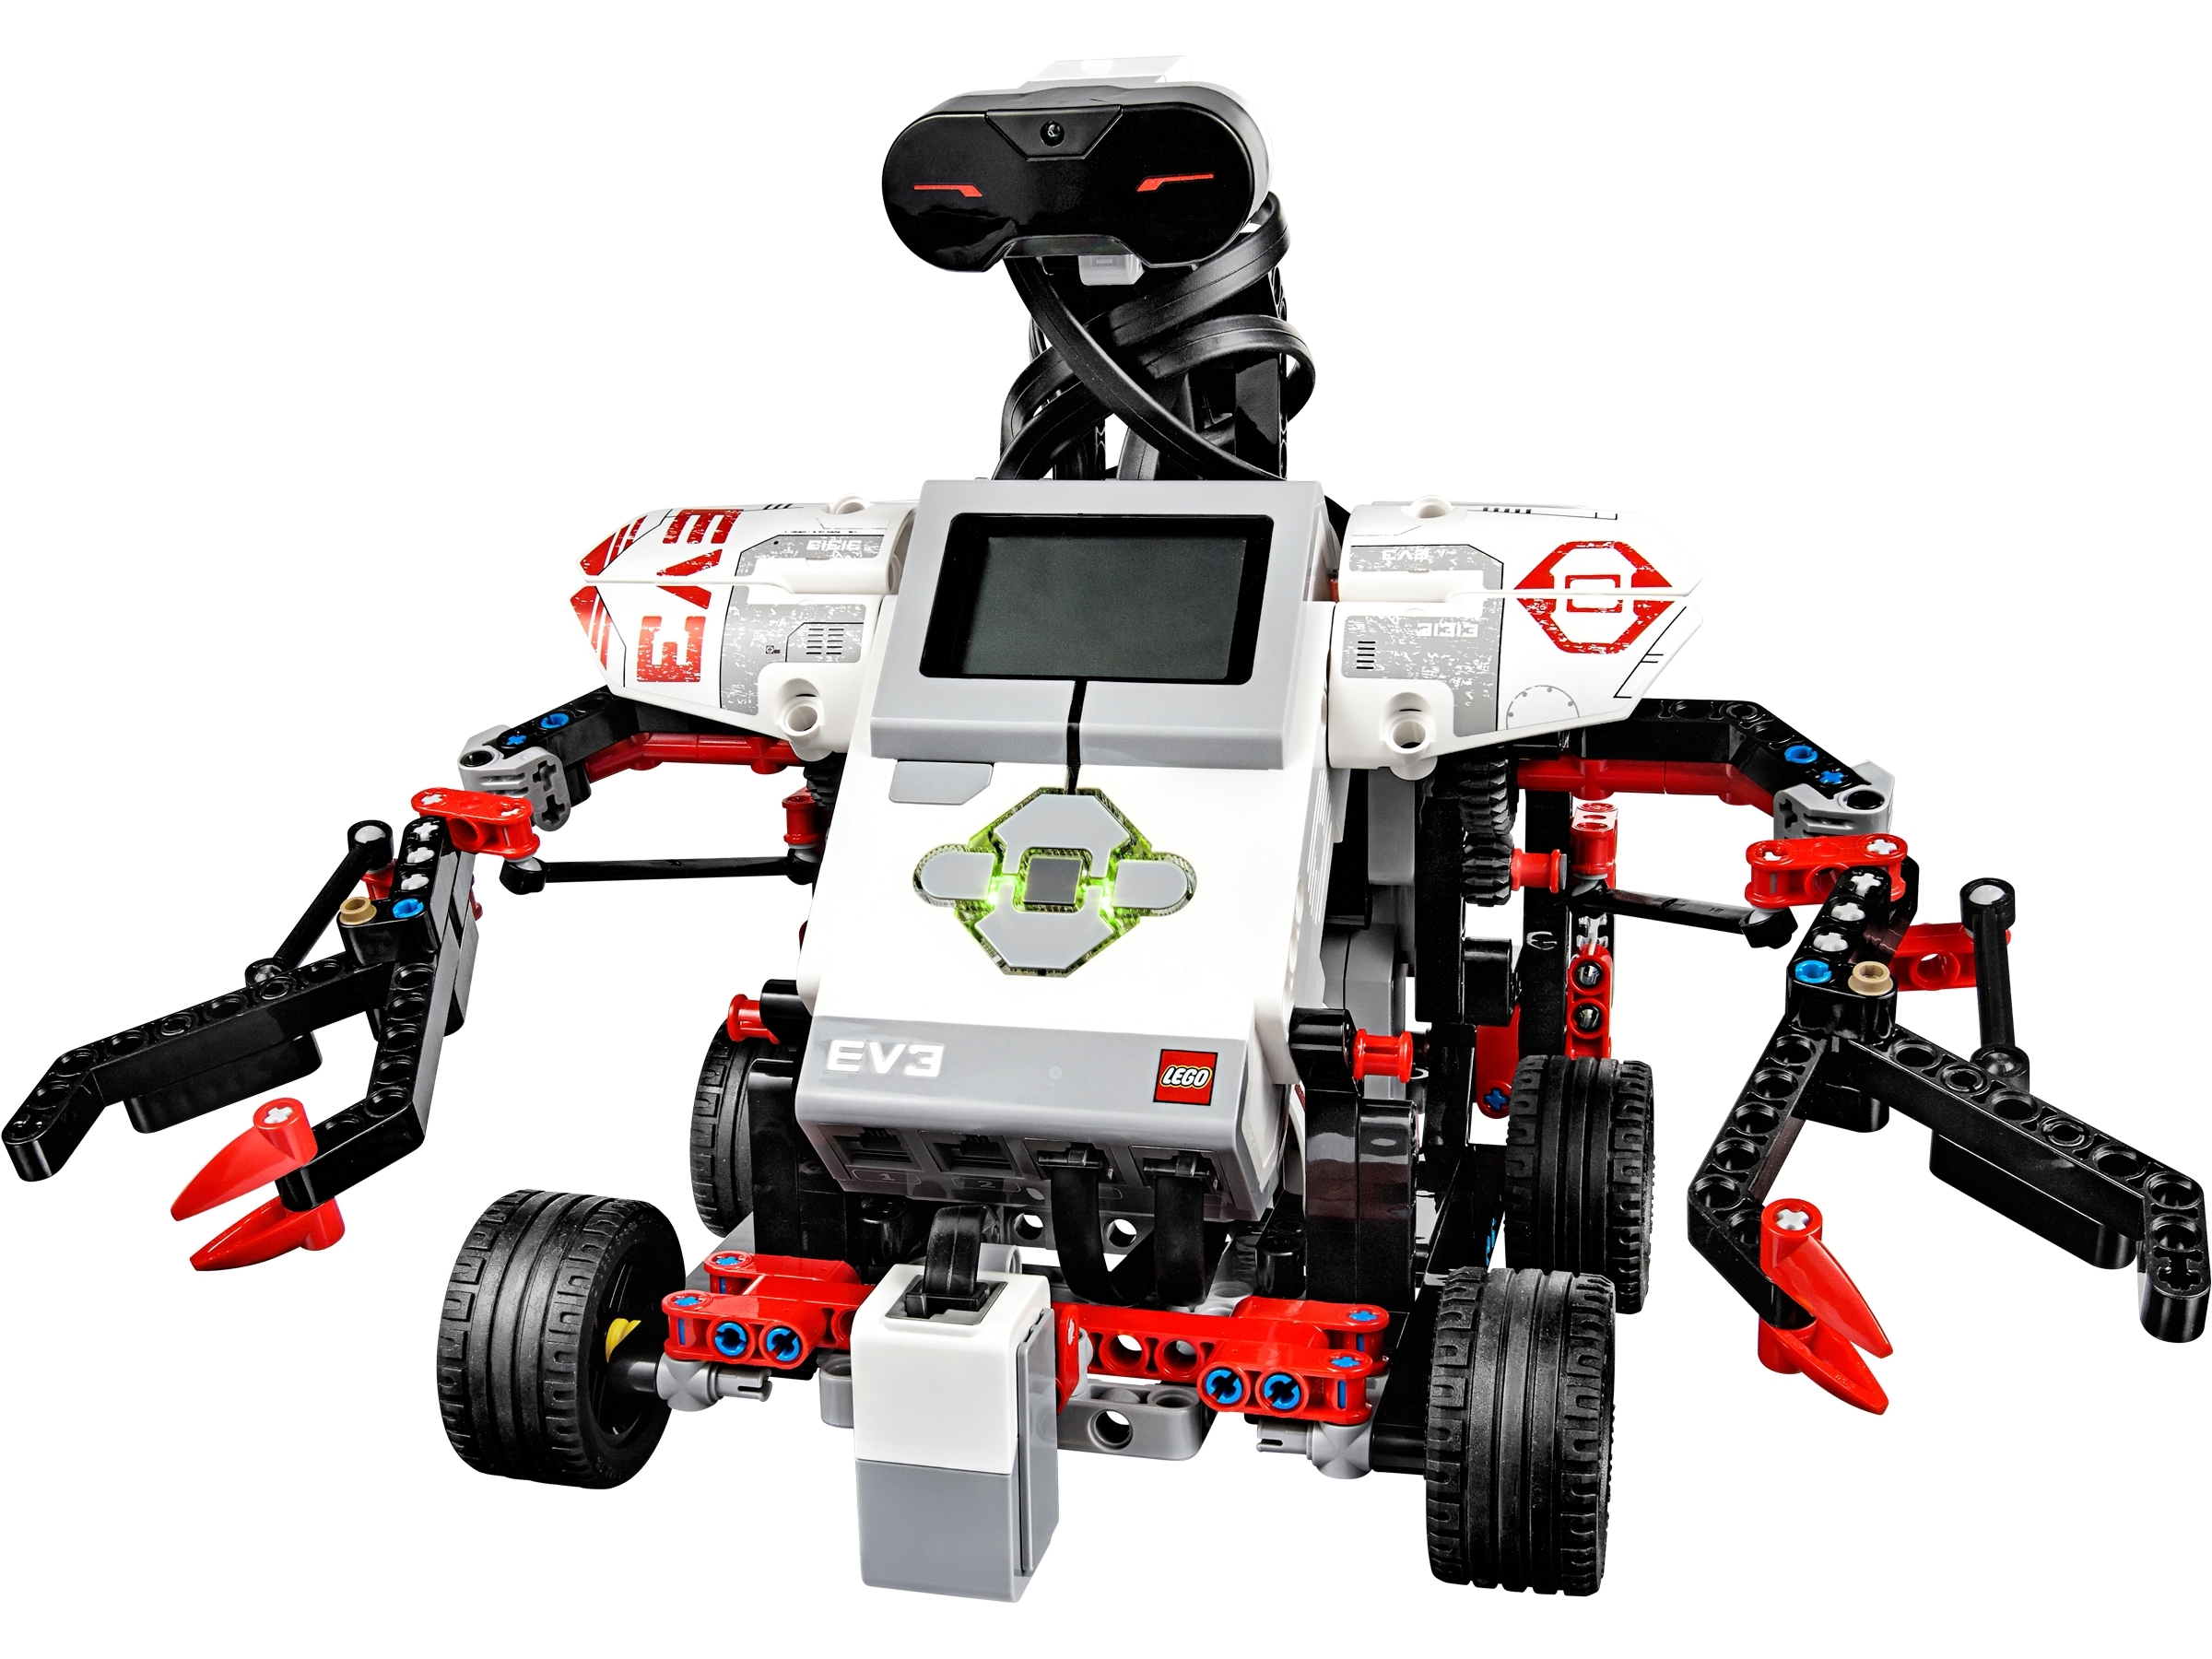 LEGO MINDSTORMS EV3 31313 Robot Kit with Remote Control for Kids,  Educational STEM Toy for Programming and Learning How to Code (601 Pieces)